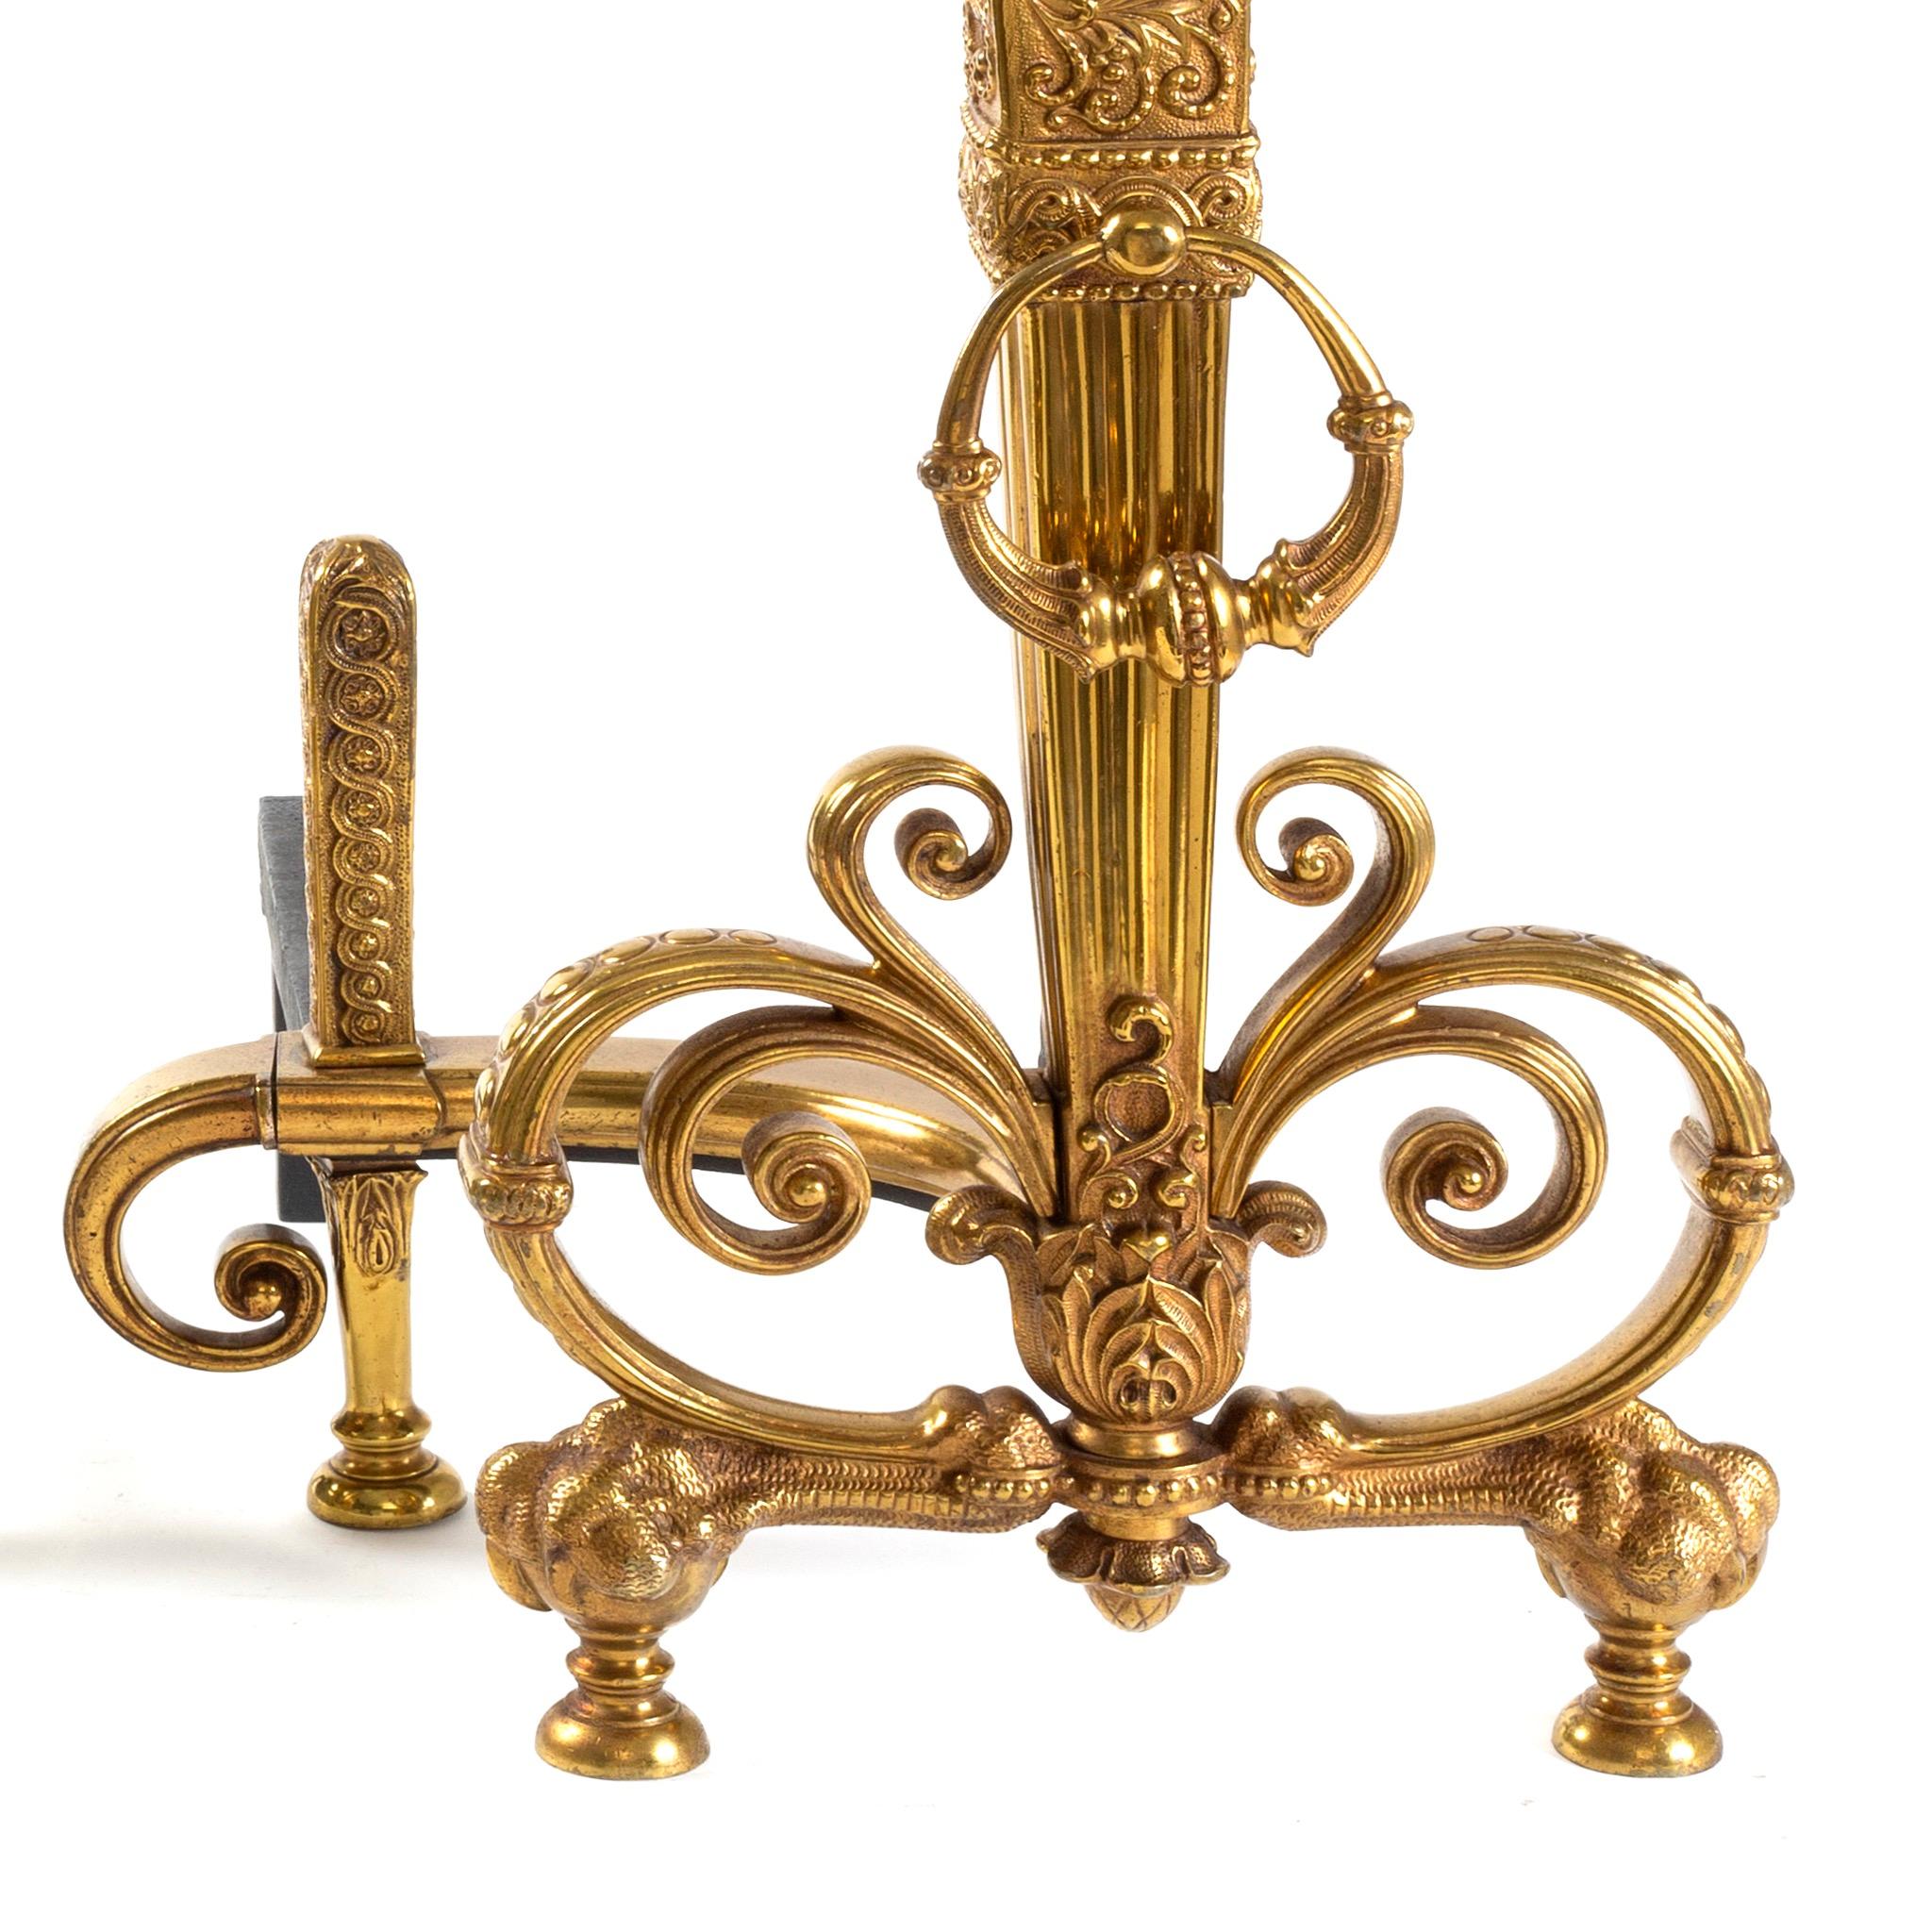 This pair of Tiffany Studios New York andirons in gilt bronze features French baroque style openwork decoration framing at their bases, with cast decoration that was made to imitate the most intricate and beautiful of Celtic strapwork. At age